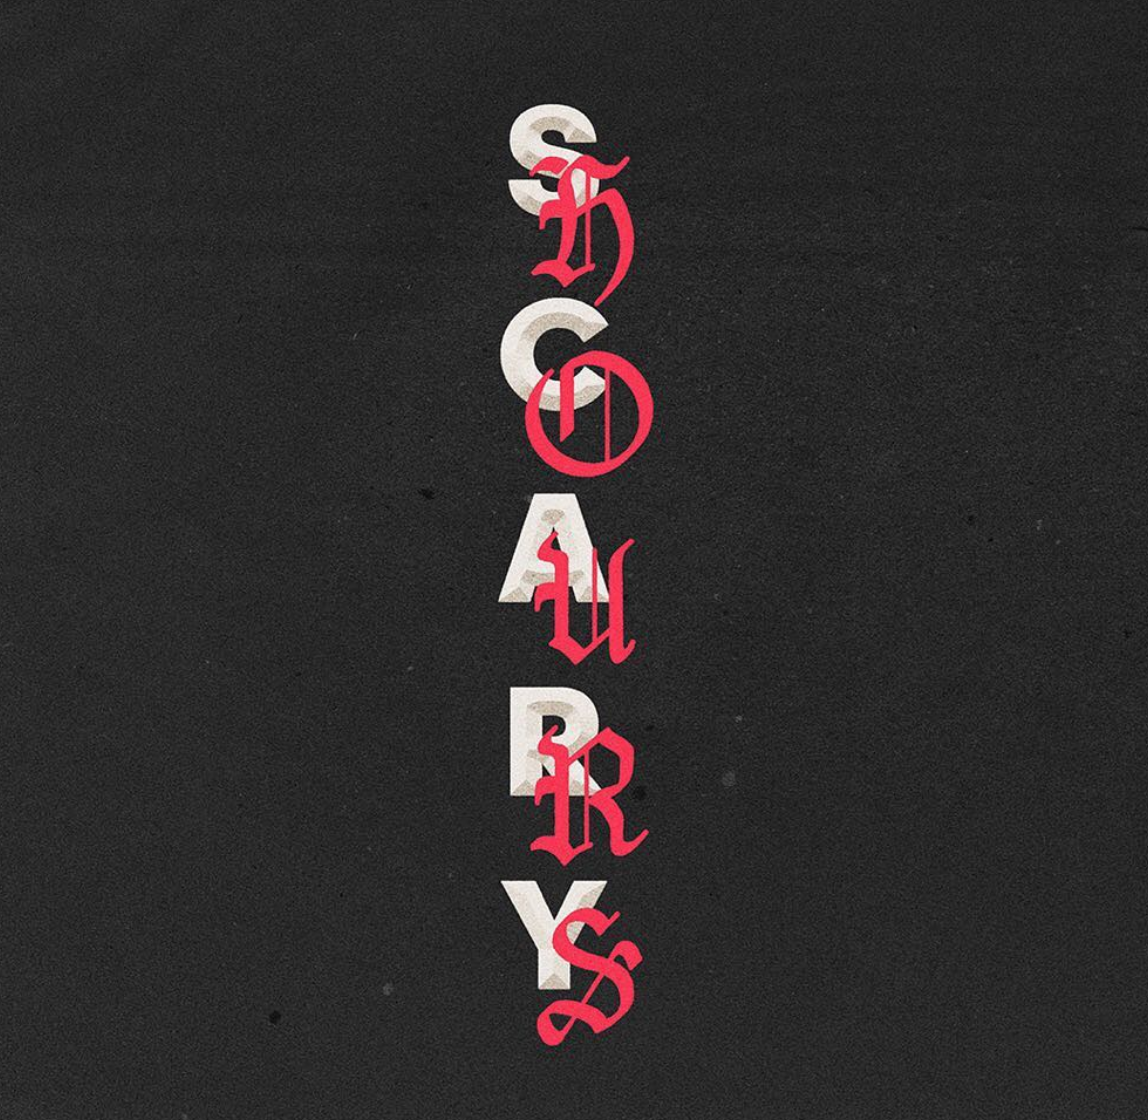 Drake Releases Surprise Two-Track ‘Scary Hours’ EP [LISTEN]